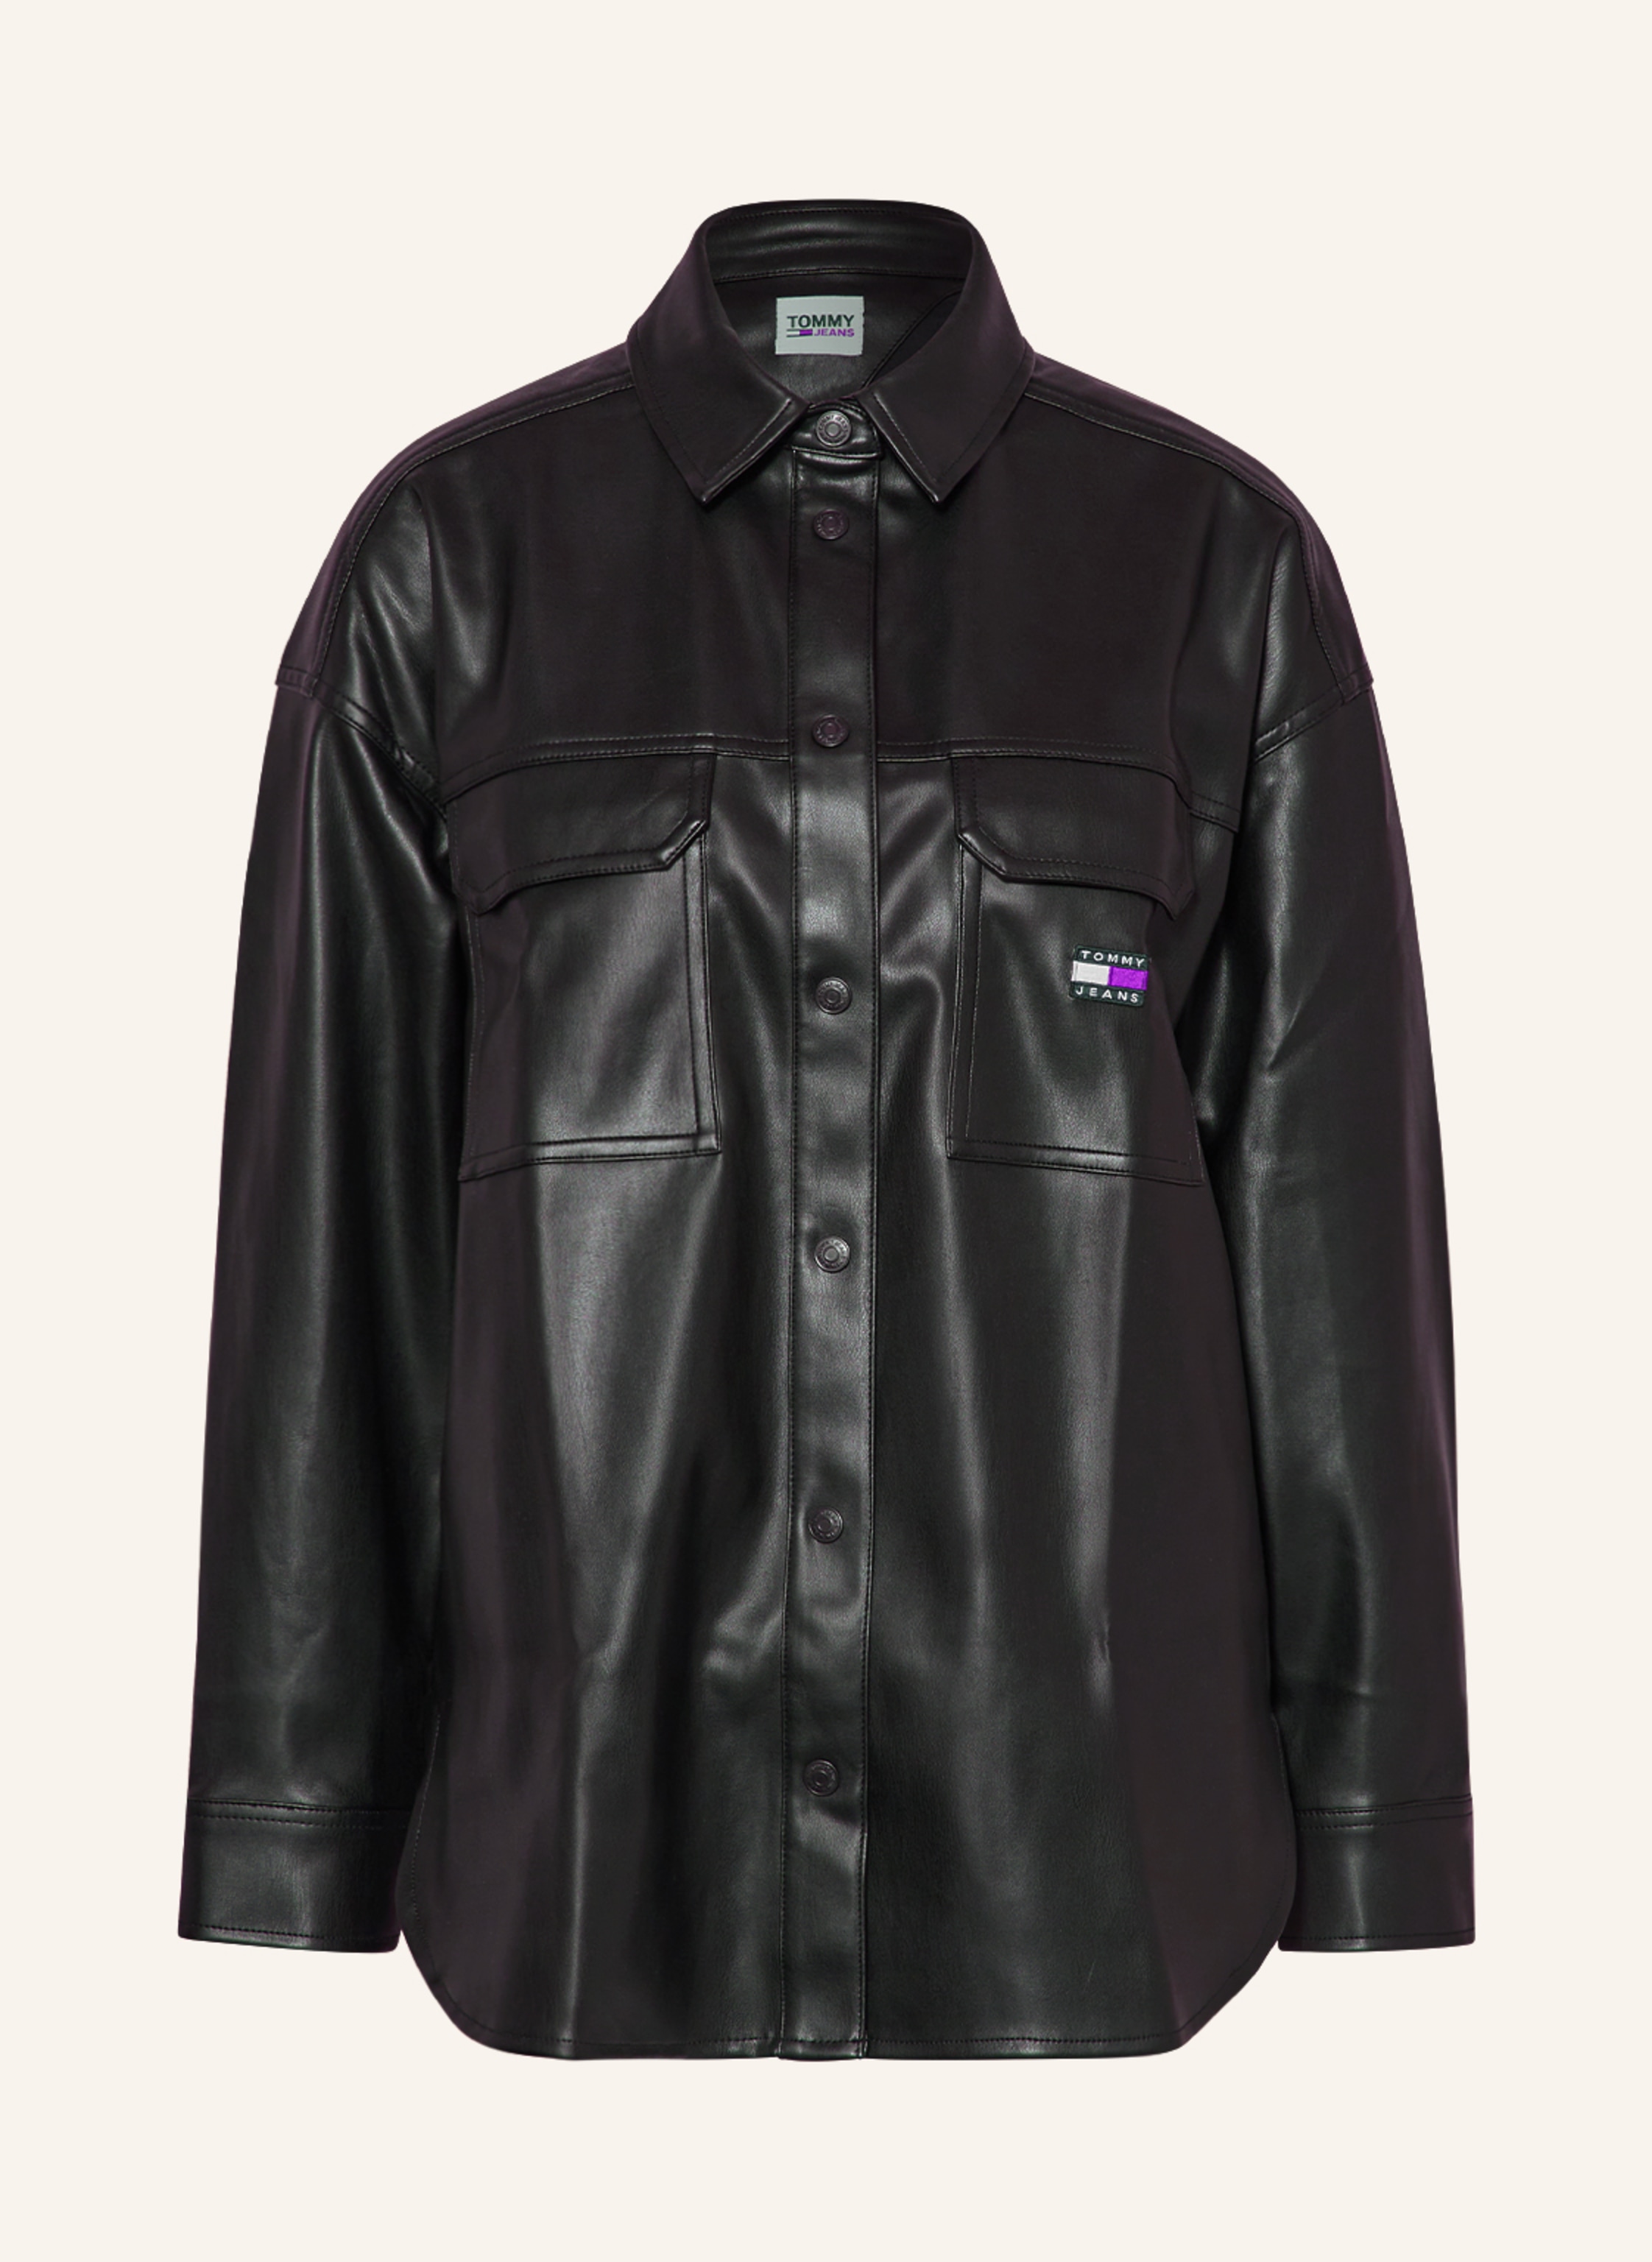 TOMMY JEANS Overshirt in leather look in black | Blusen